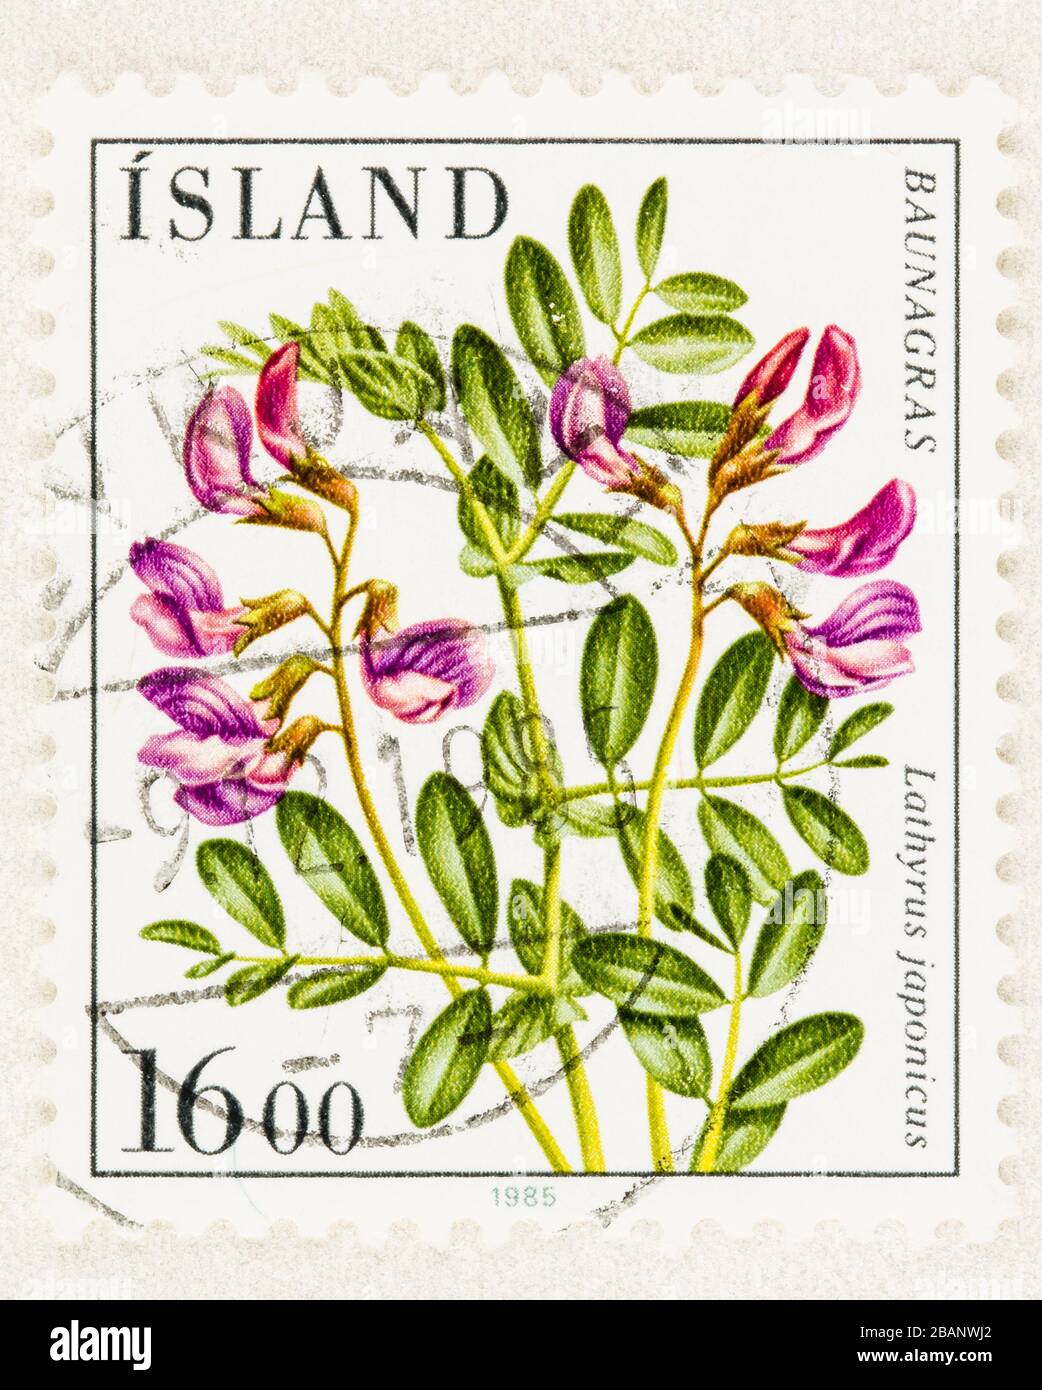 SEATTLE WASHINGTON - March 28, 2020: Close up of used Iceland stamp featuring  native plant Lathyrus japonicus, Beach Pea. Scott # 604 Stock Photo